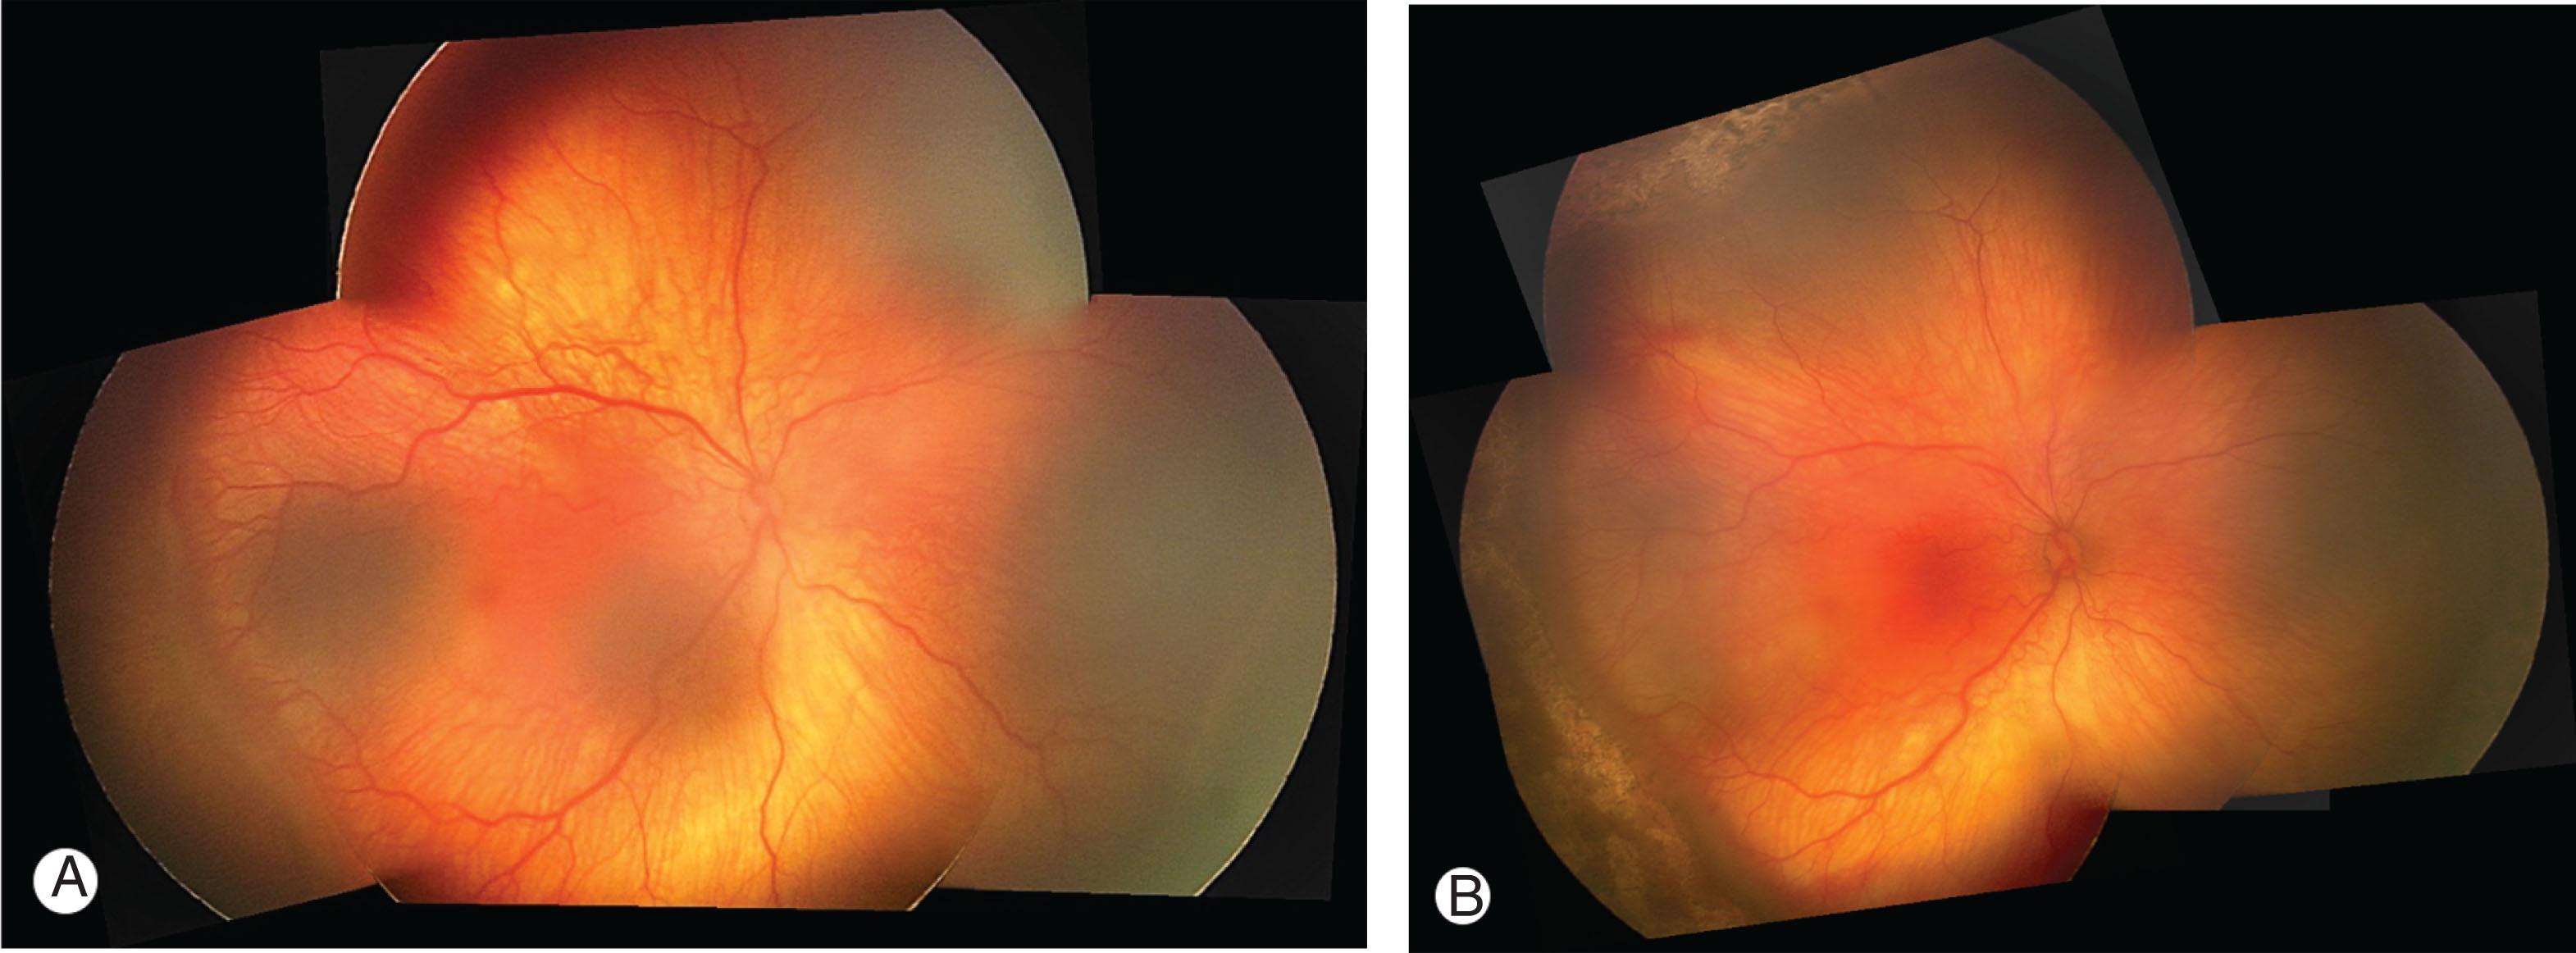 Fig. 43.6, Type 1 retinopathy of prematurity. (A) Stage 3 temporally with neovascularization and hemorrhages along the elevated ridge. Note the venous dilation and arteriolar tortuosity (plus disease) with a vascular branching pattern. Stage 2 is present in the nasal retina. (B) The same eye after laser photocoagulation to the avascular periphery.